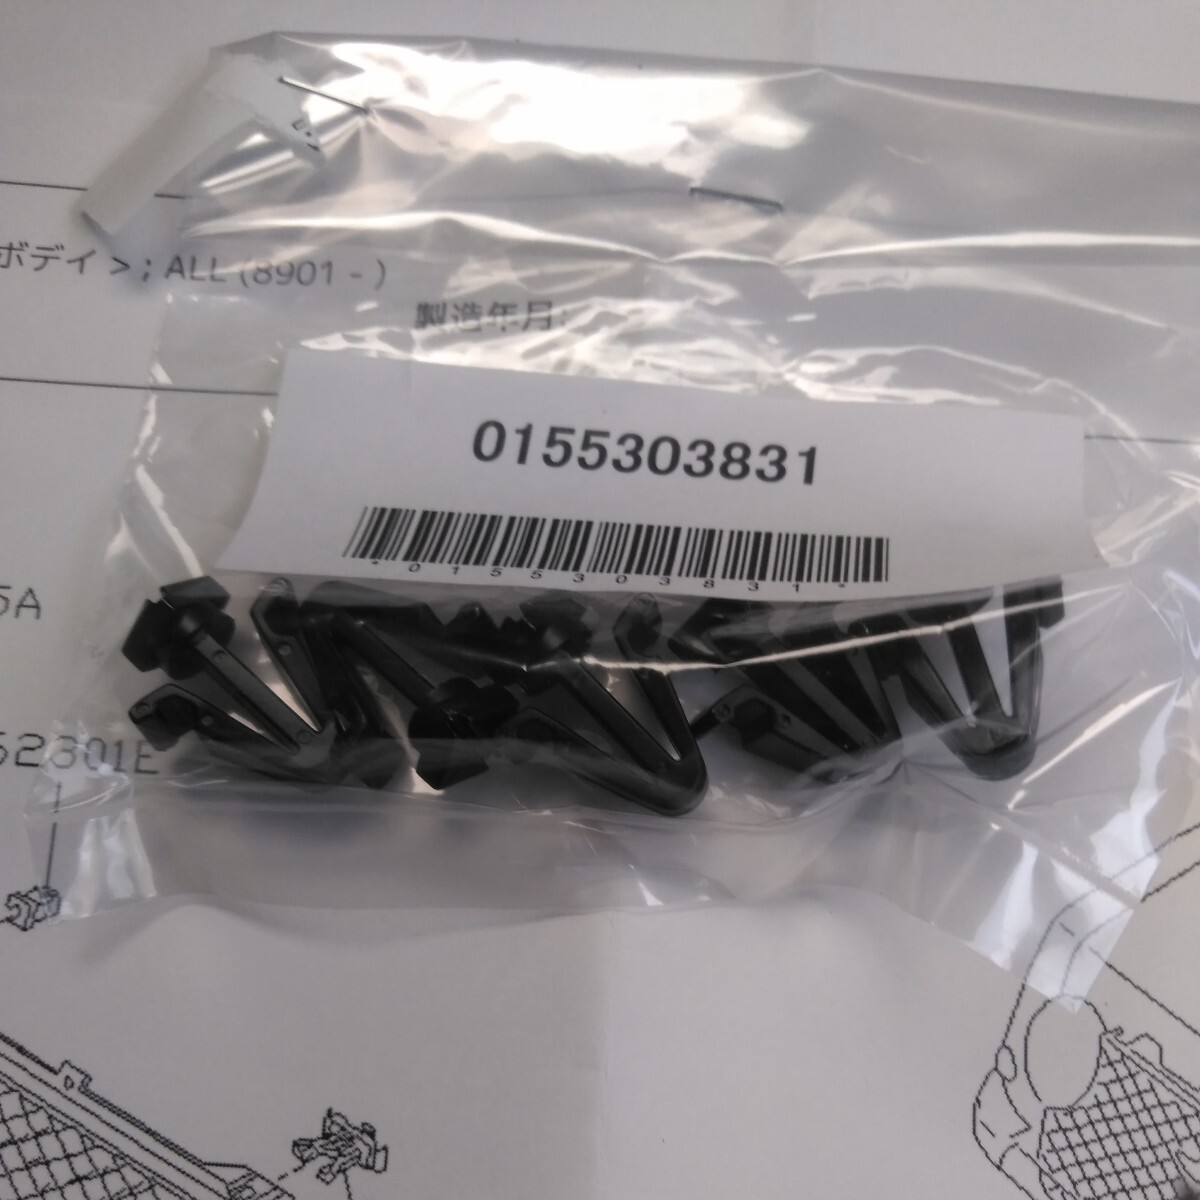 ① prompt decision postage included Nissan PK10 Pao PAO front grille clip 5 piece set unused genuine products ⑤